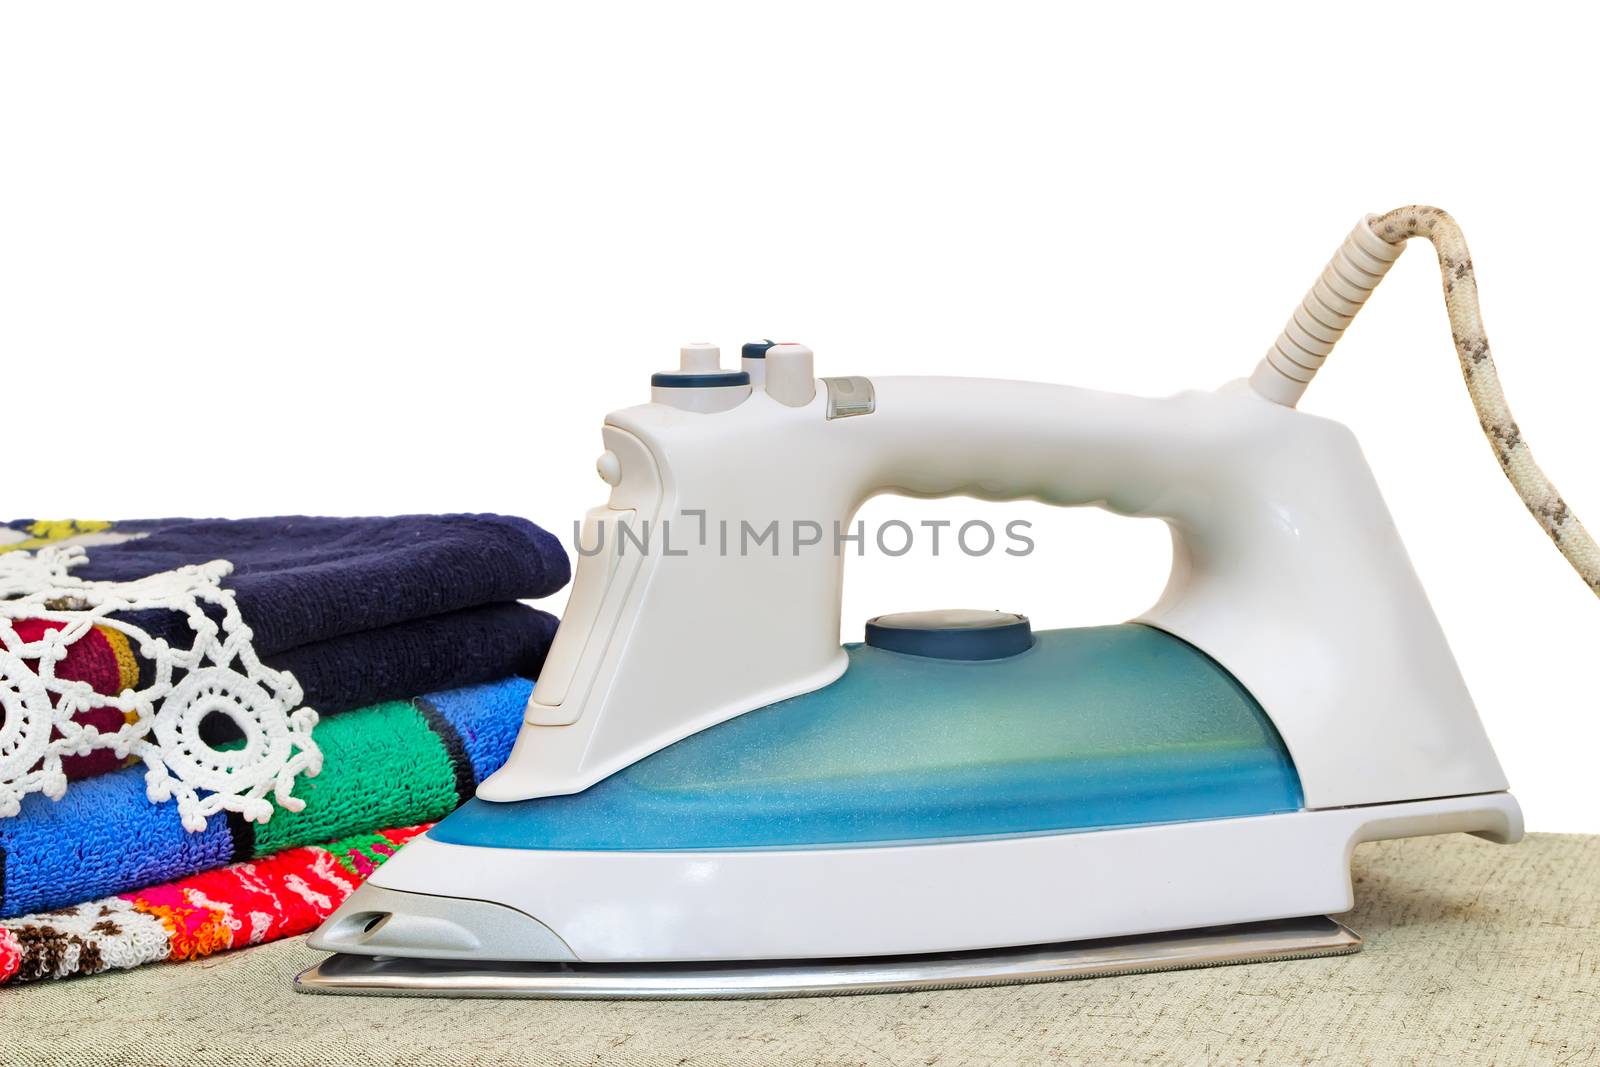 Convenient electric iron on the Ironing Board. Presented on a white background.